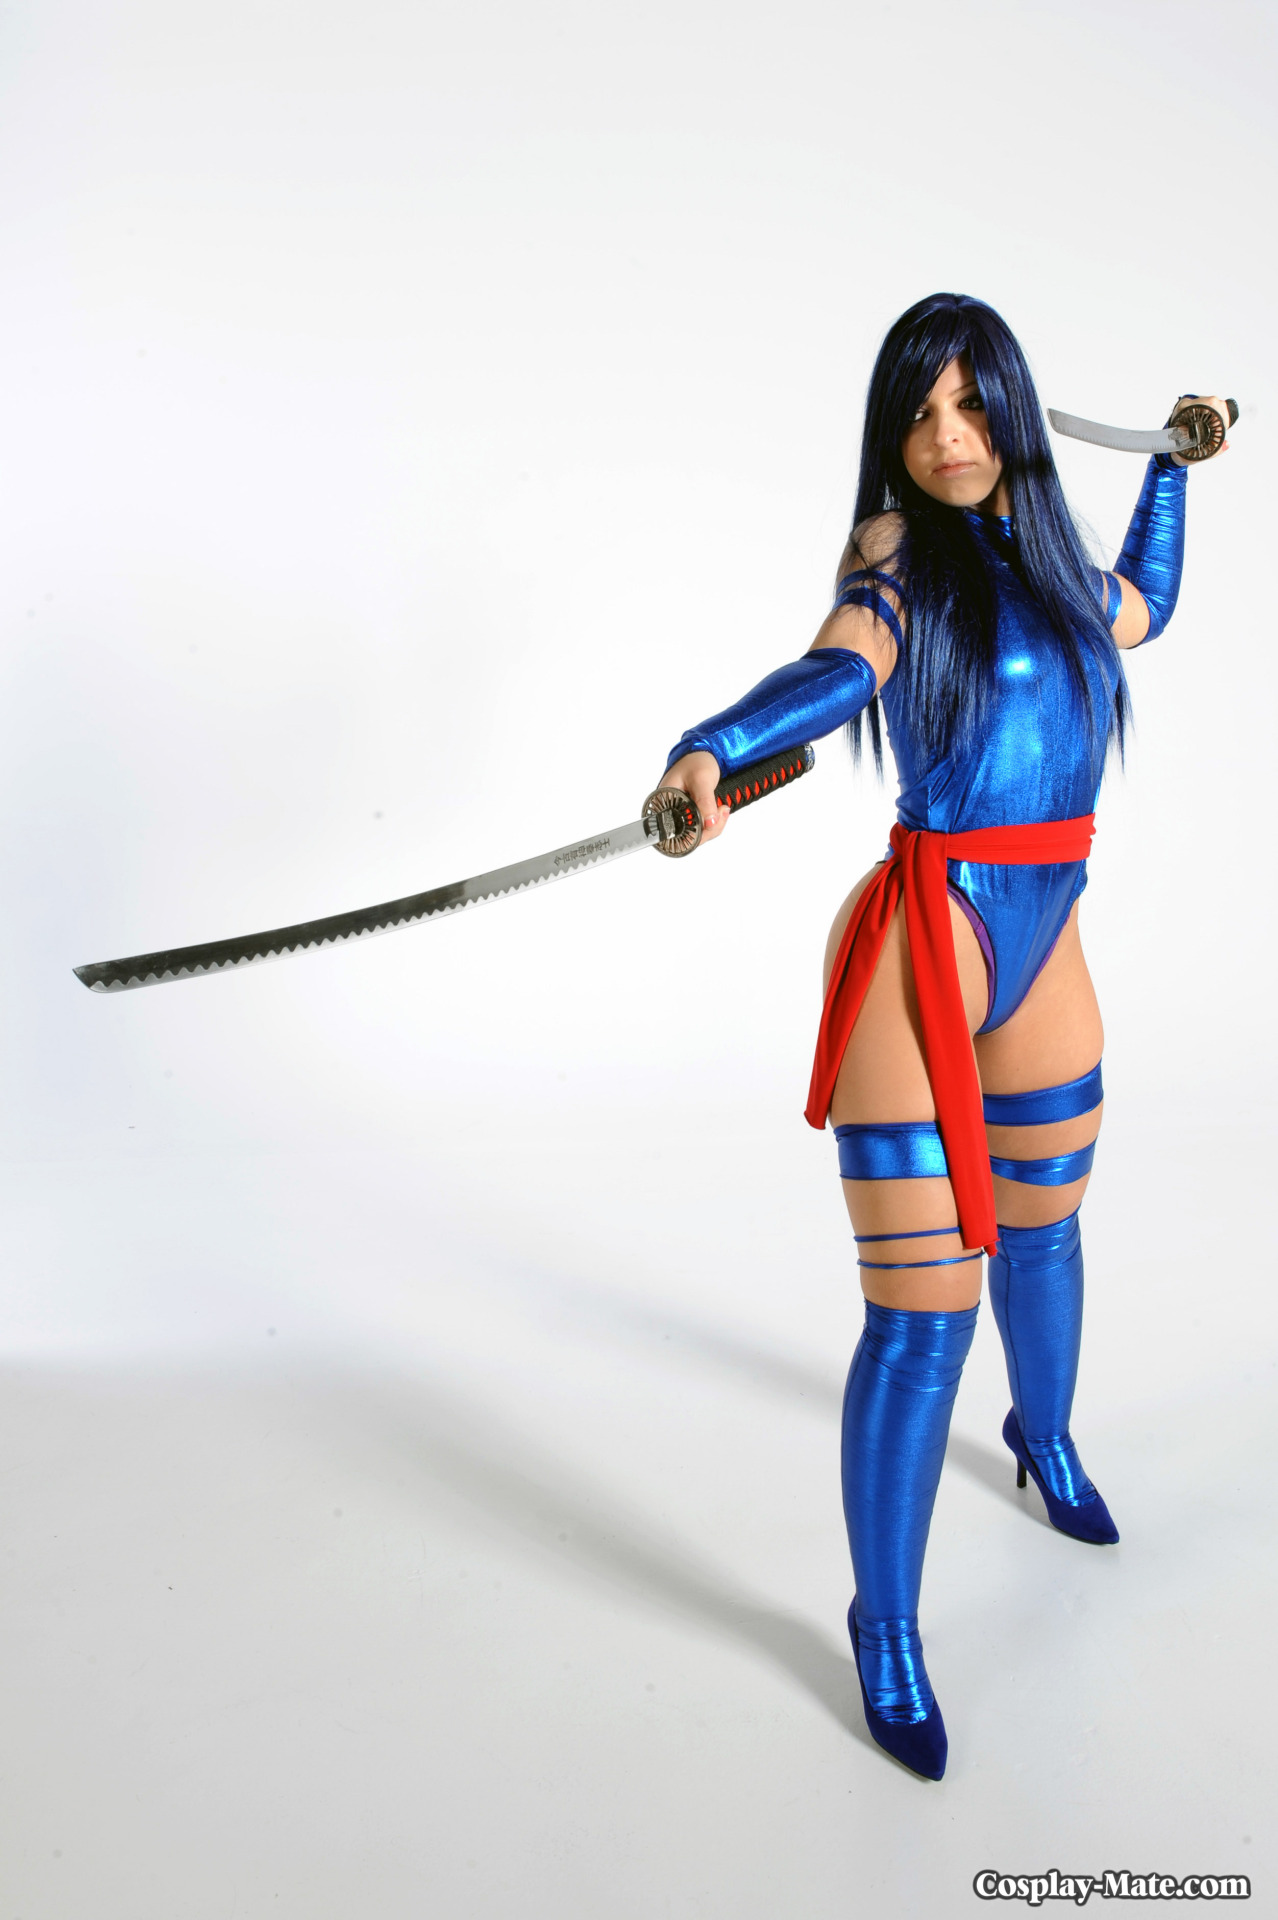 Psylocke set ready on www.cosplay-mate.com (paysite)Â  the full set is 68 pictures.